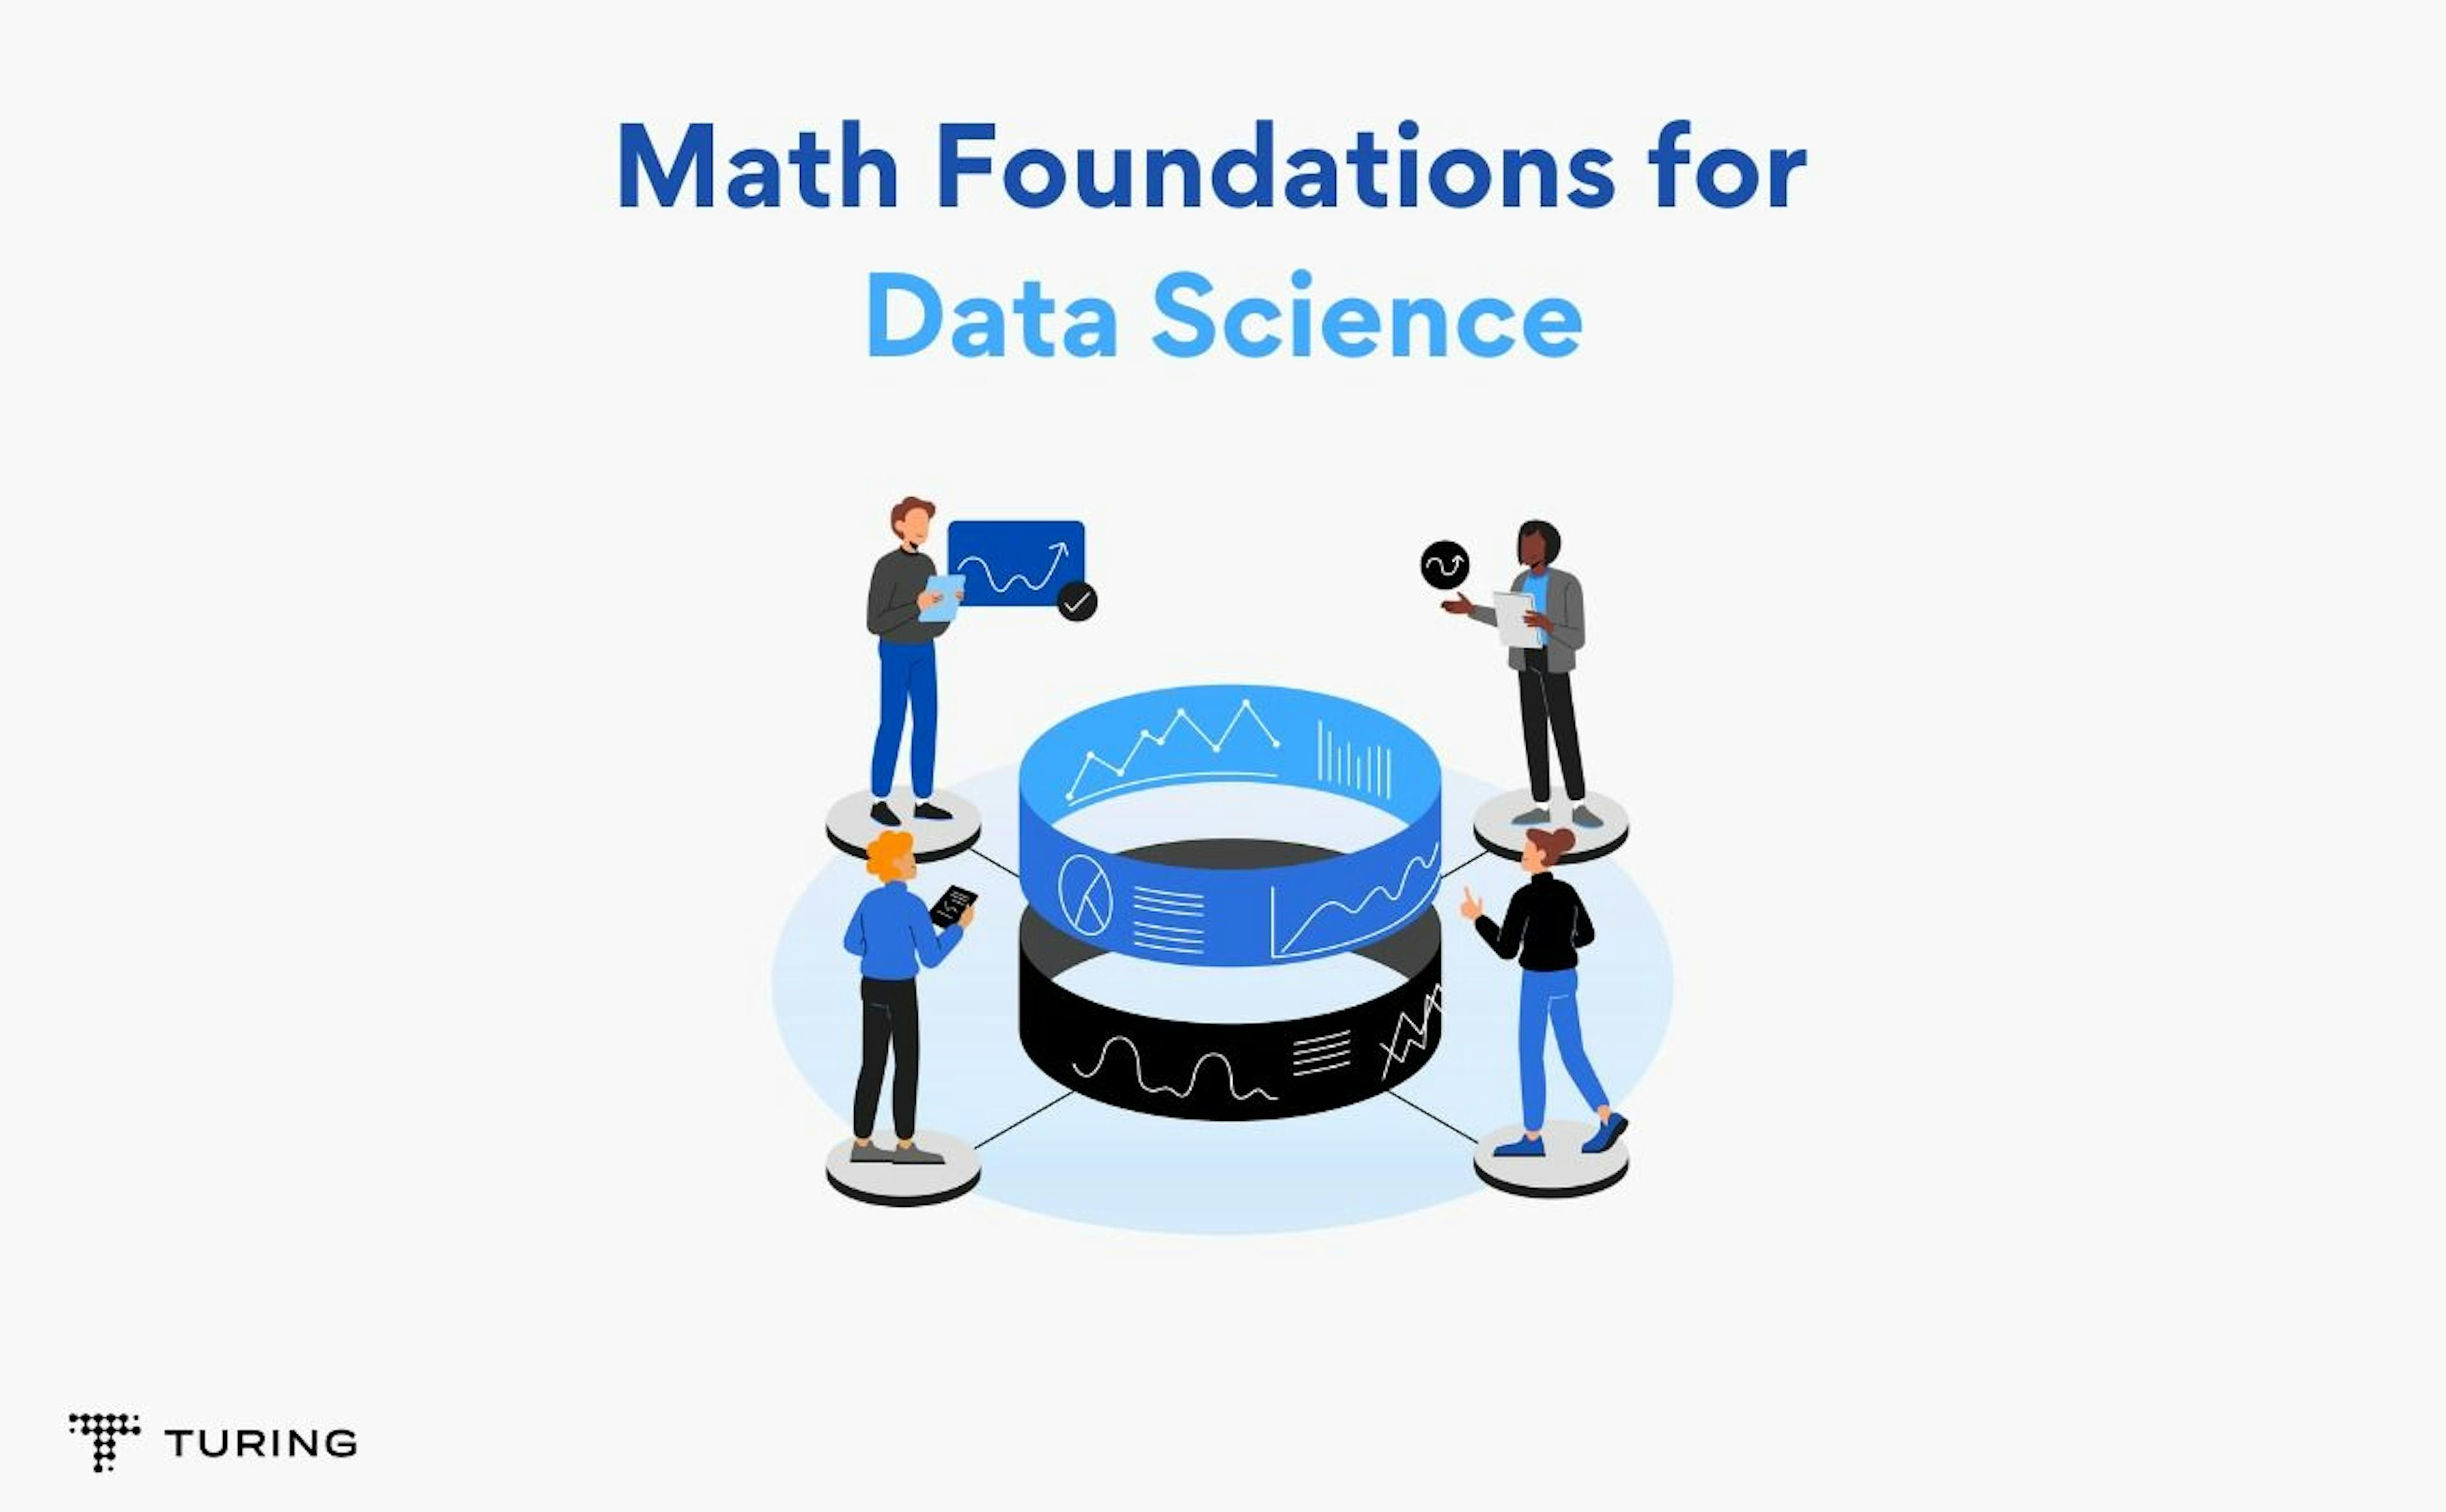 Math Foundations for Data Science